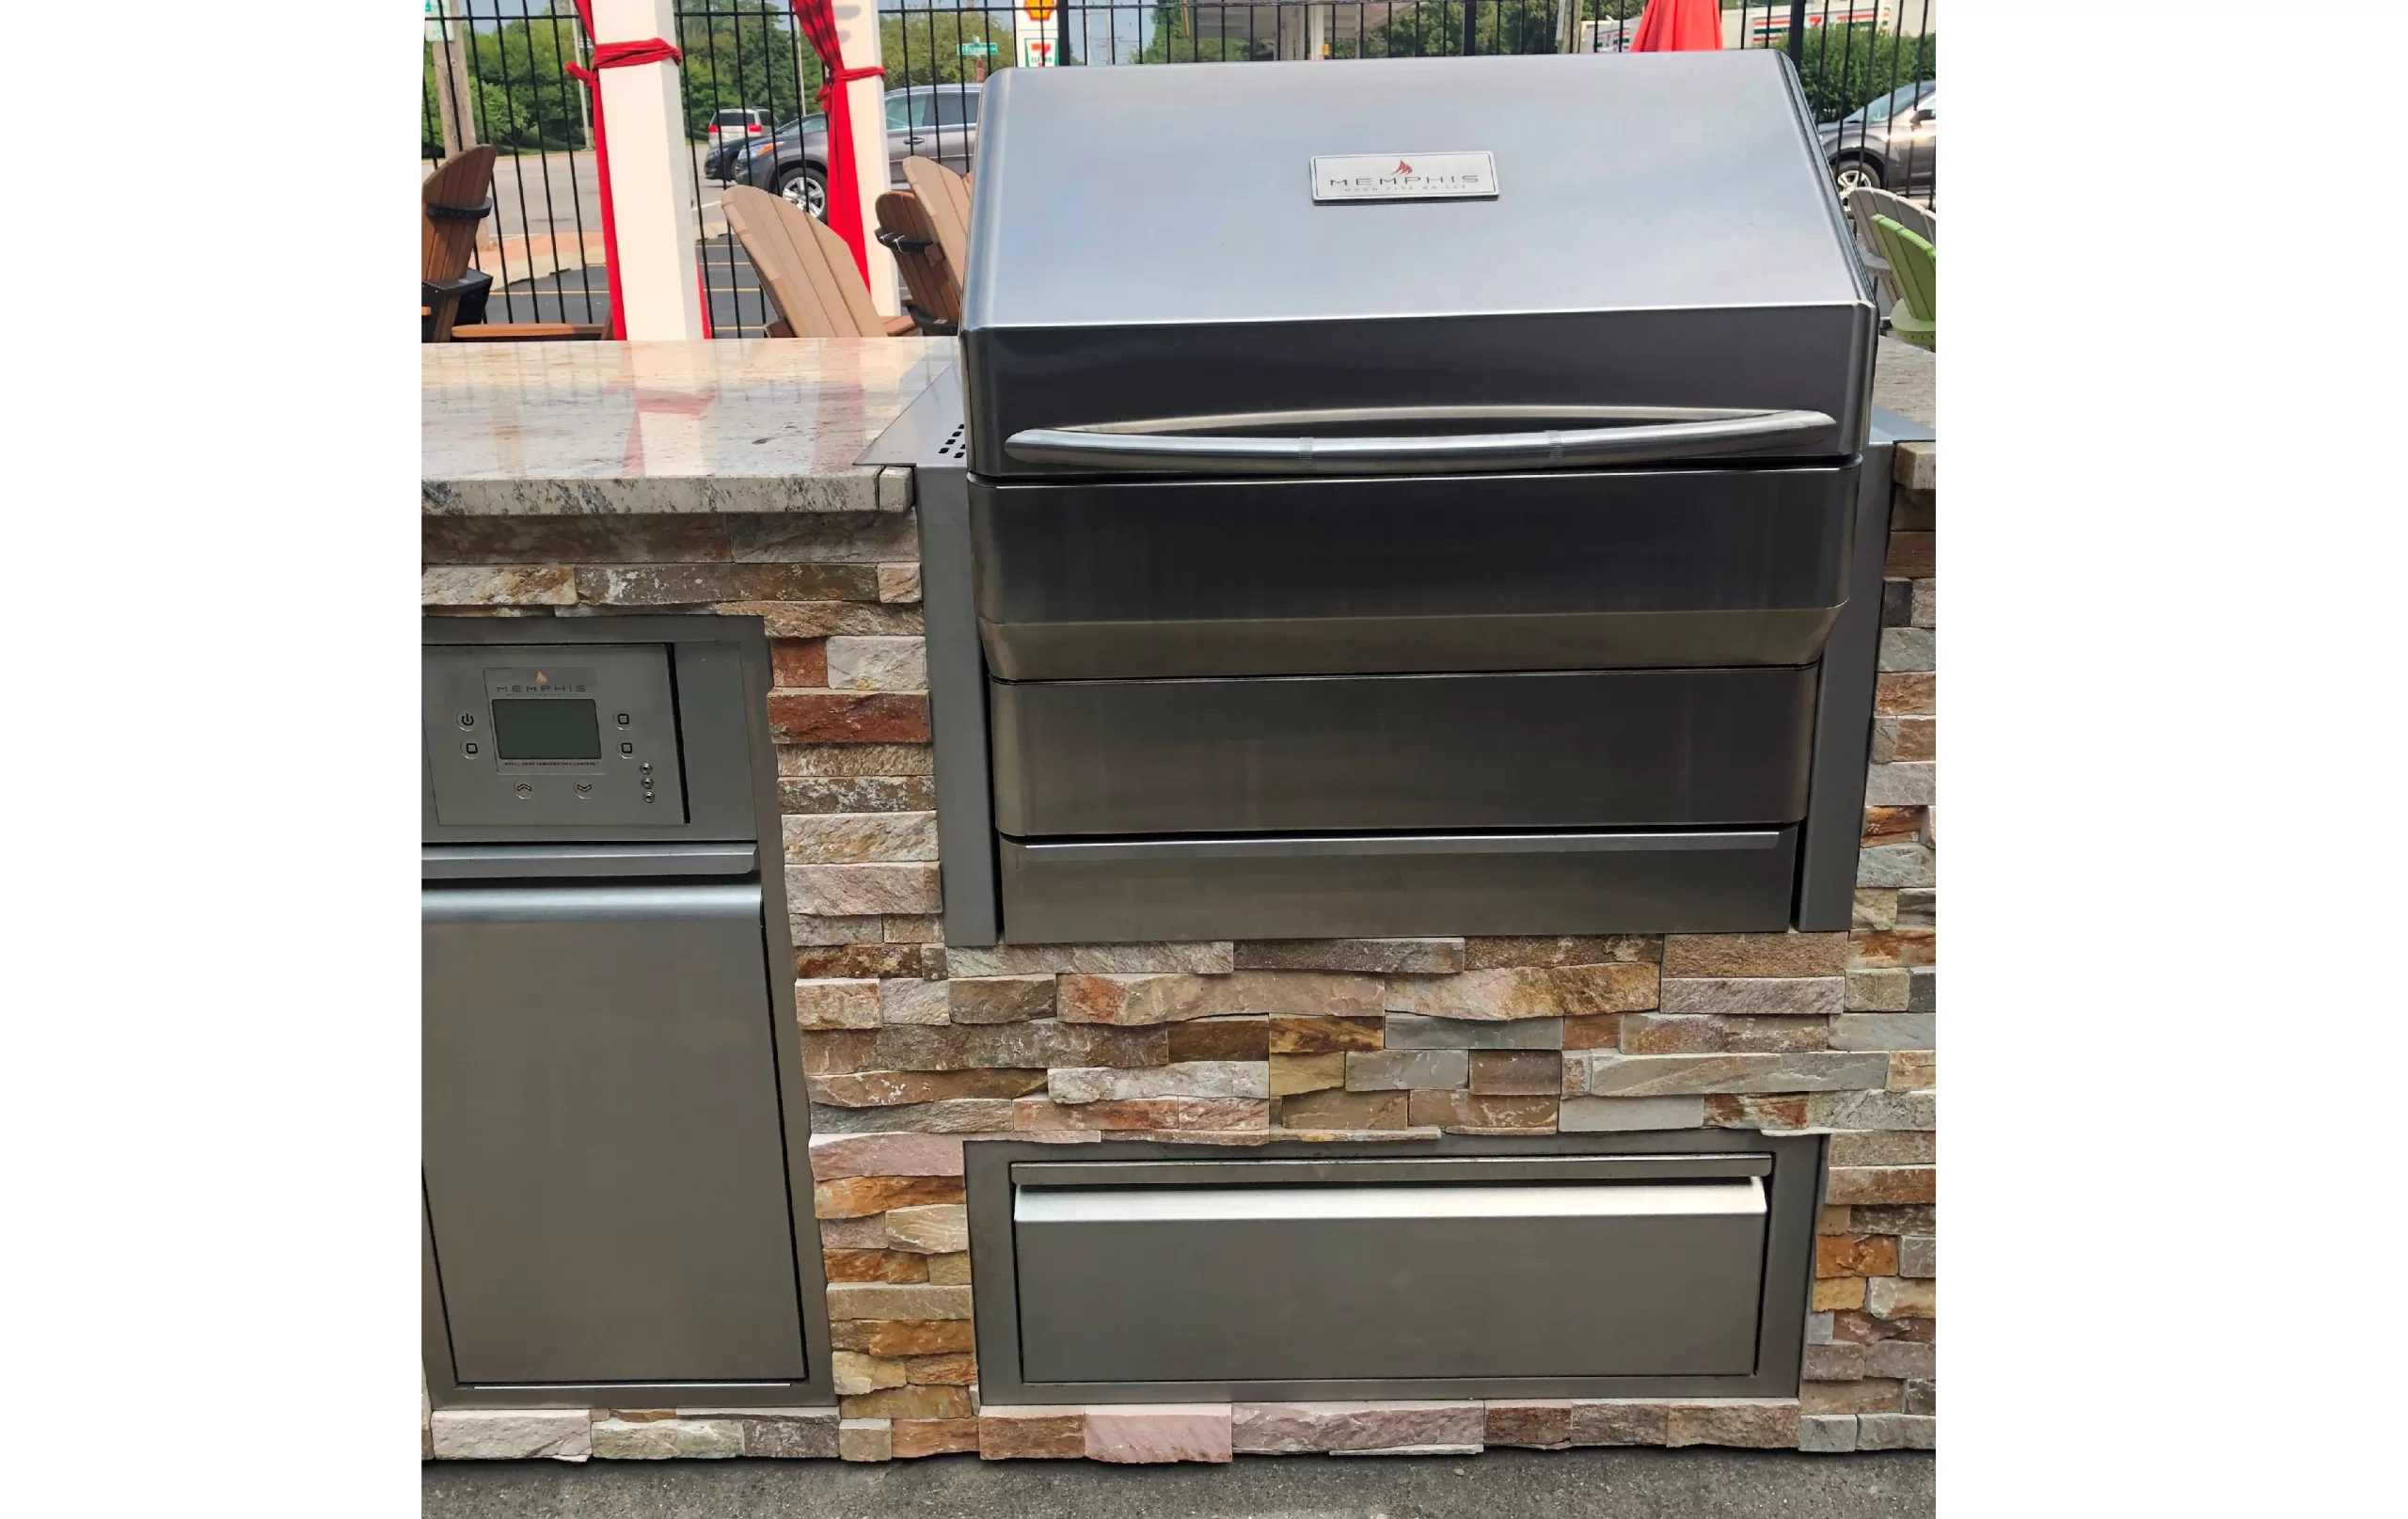 Demo Memphis Wood Fire Pellet Grill And Control Panel With Trash Drawer